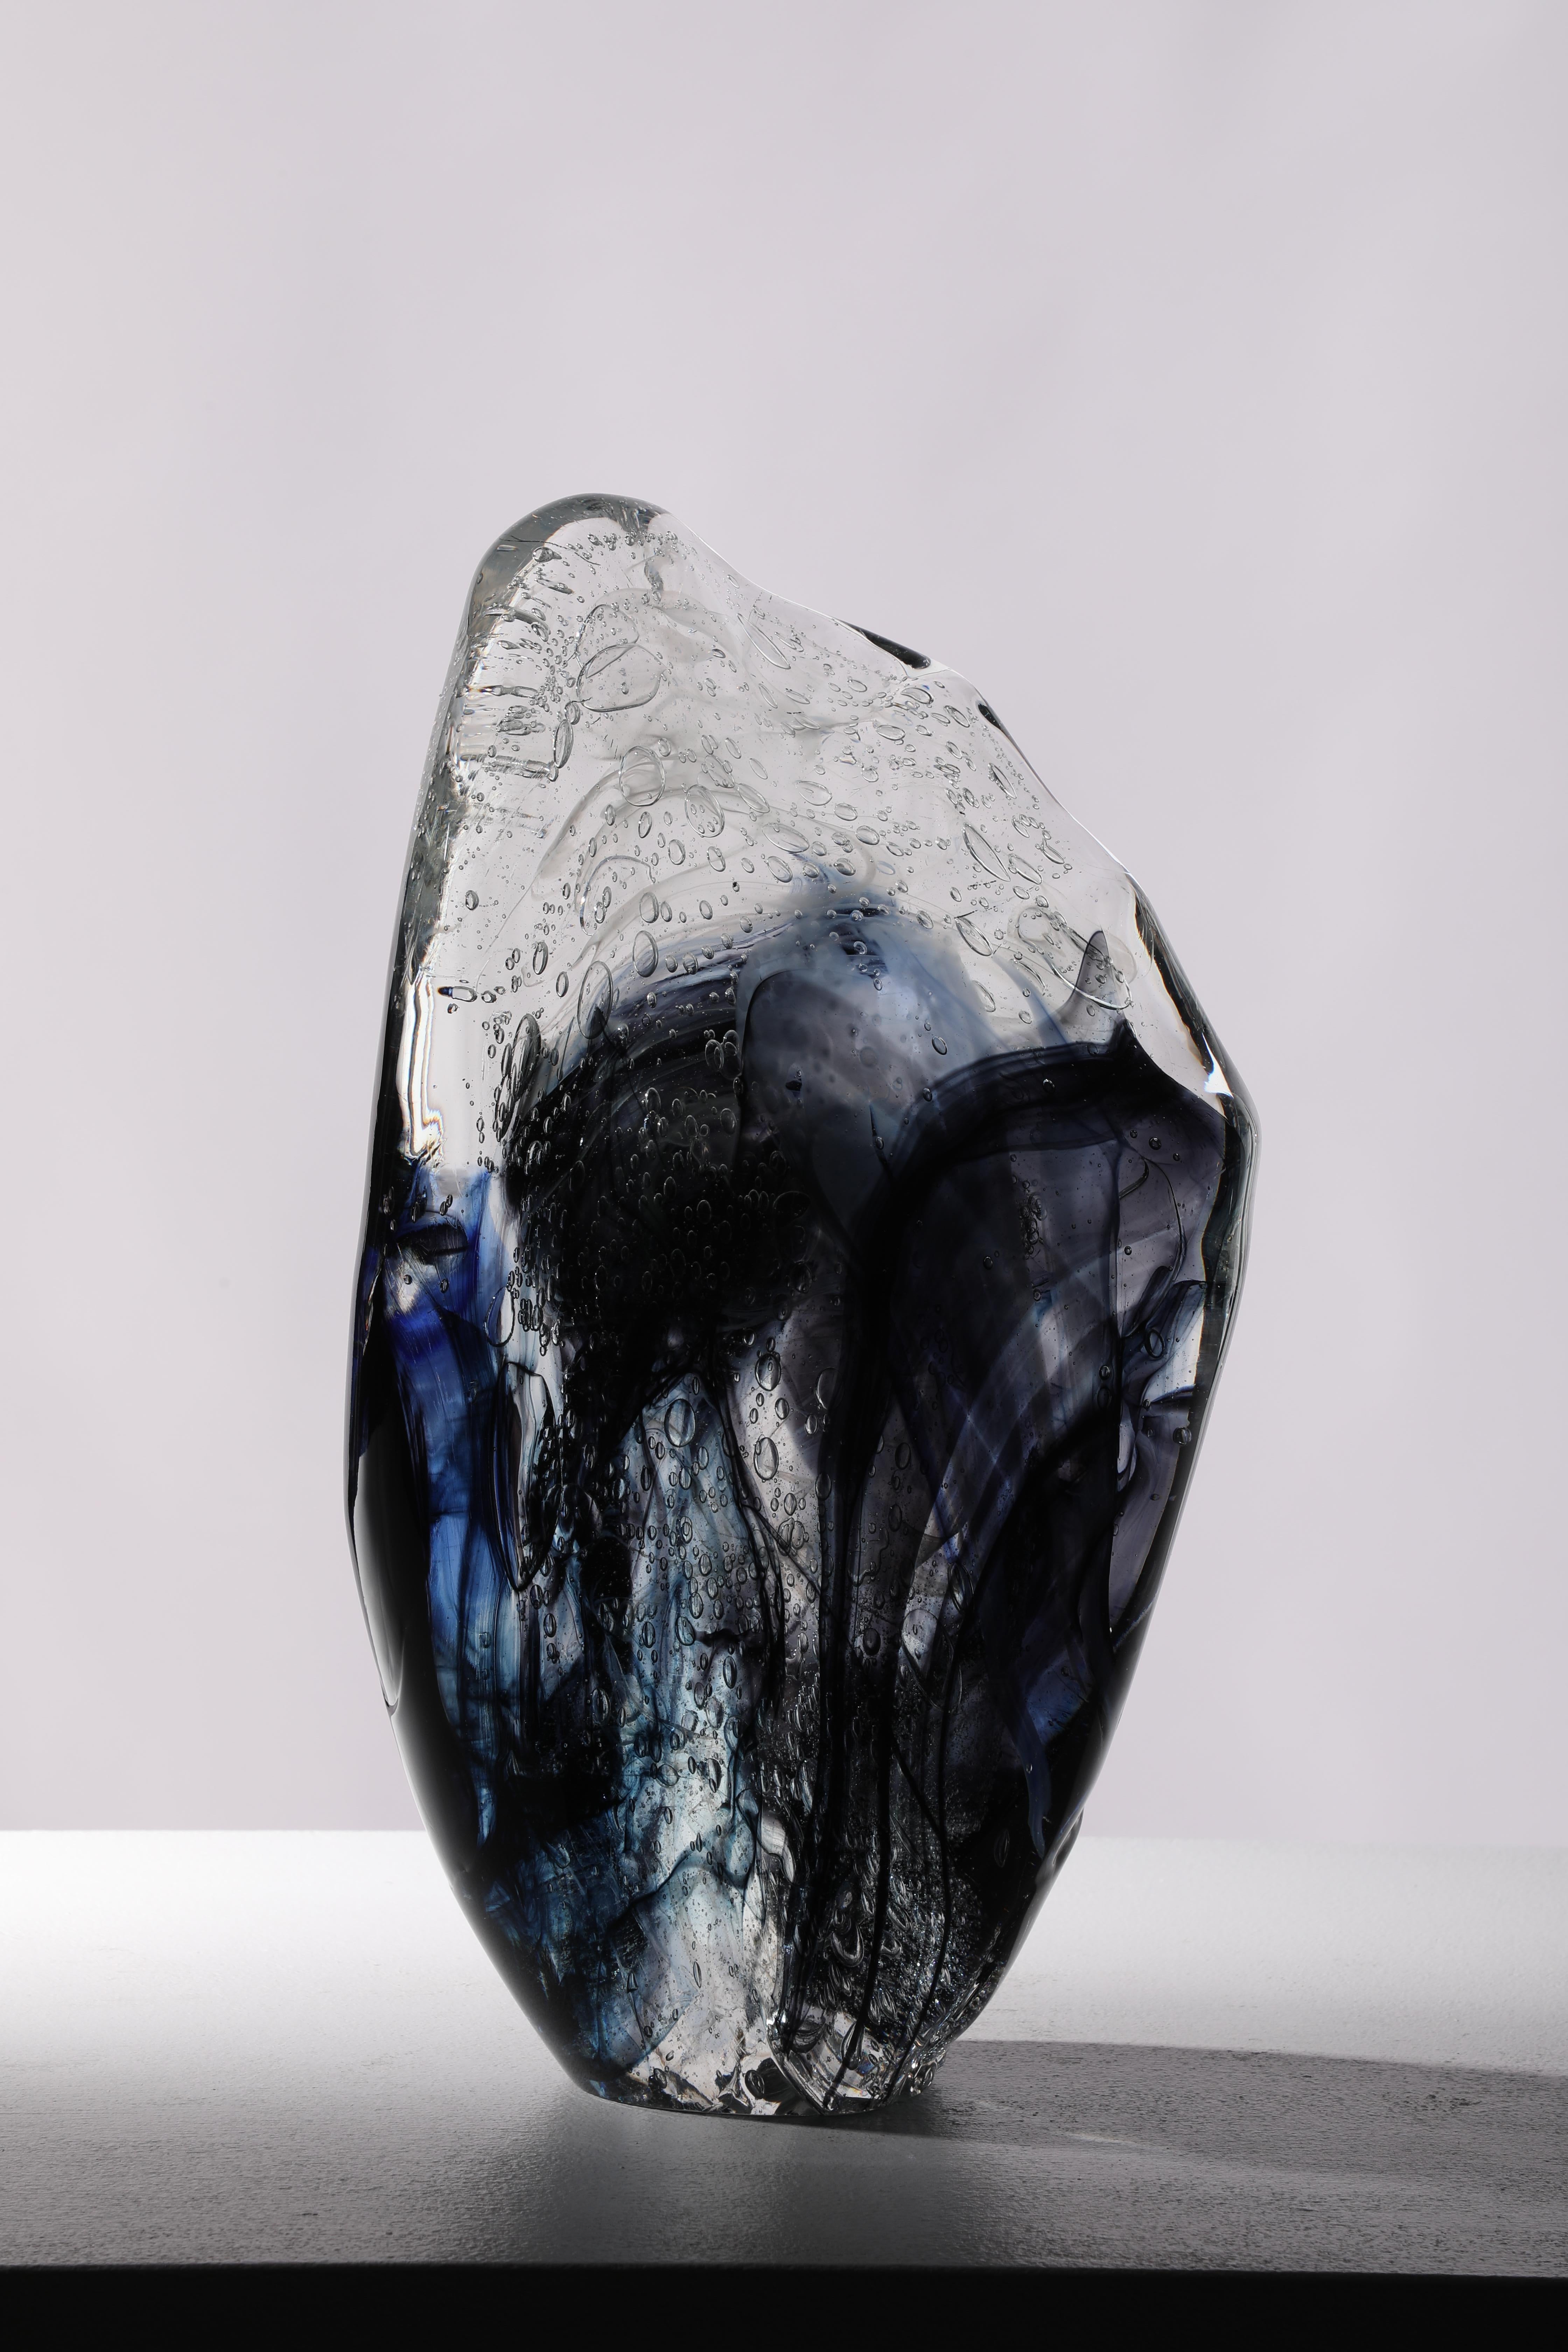 'Alcaid' is a contemporary abstract cast glass sculpture by David Ruth from his Internal Space series. It is made by heating the glass and then hand working it into form. The main colors of black and dark blue contrasts the clear and white glass.